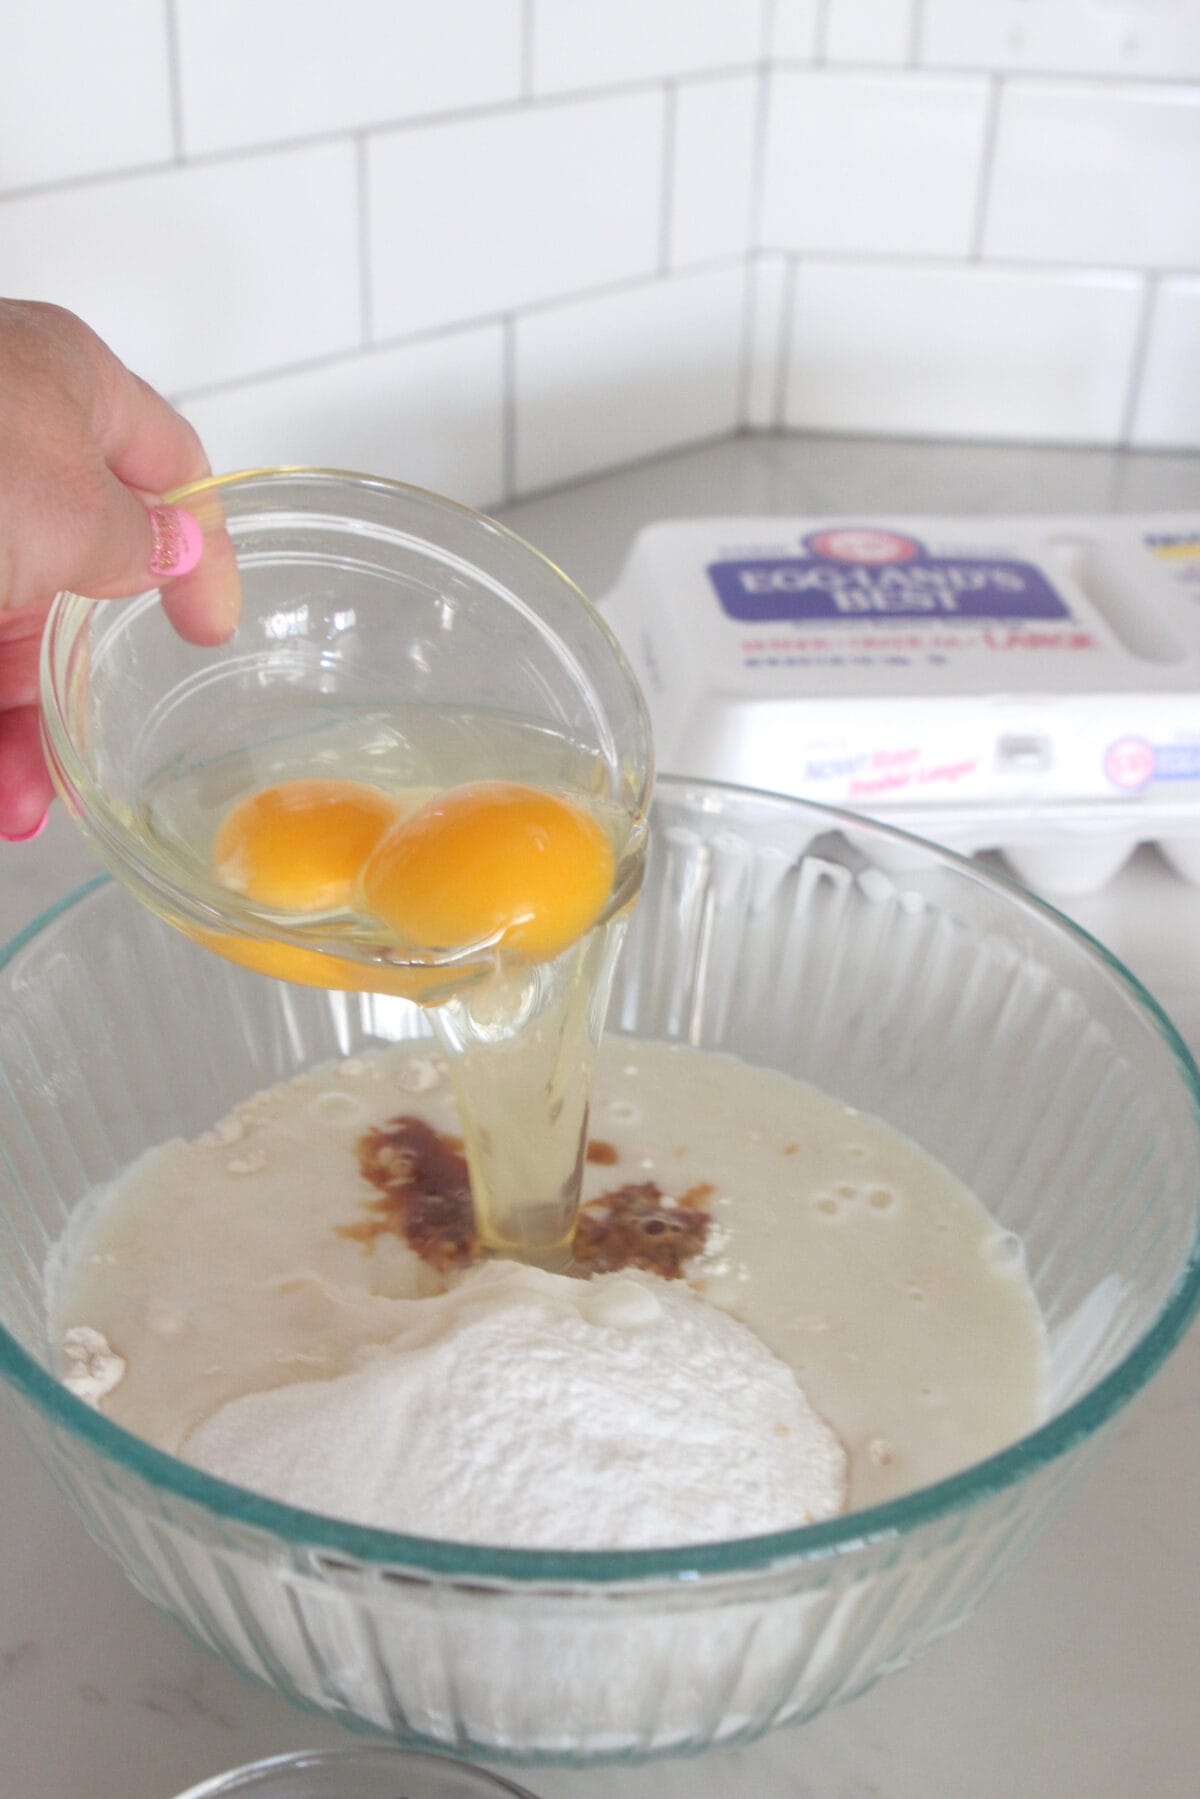 pouring eggs into mixing bowl for homemade pancakes